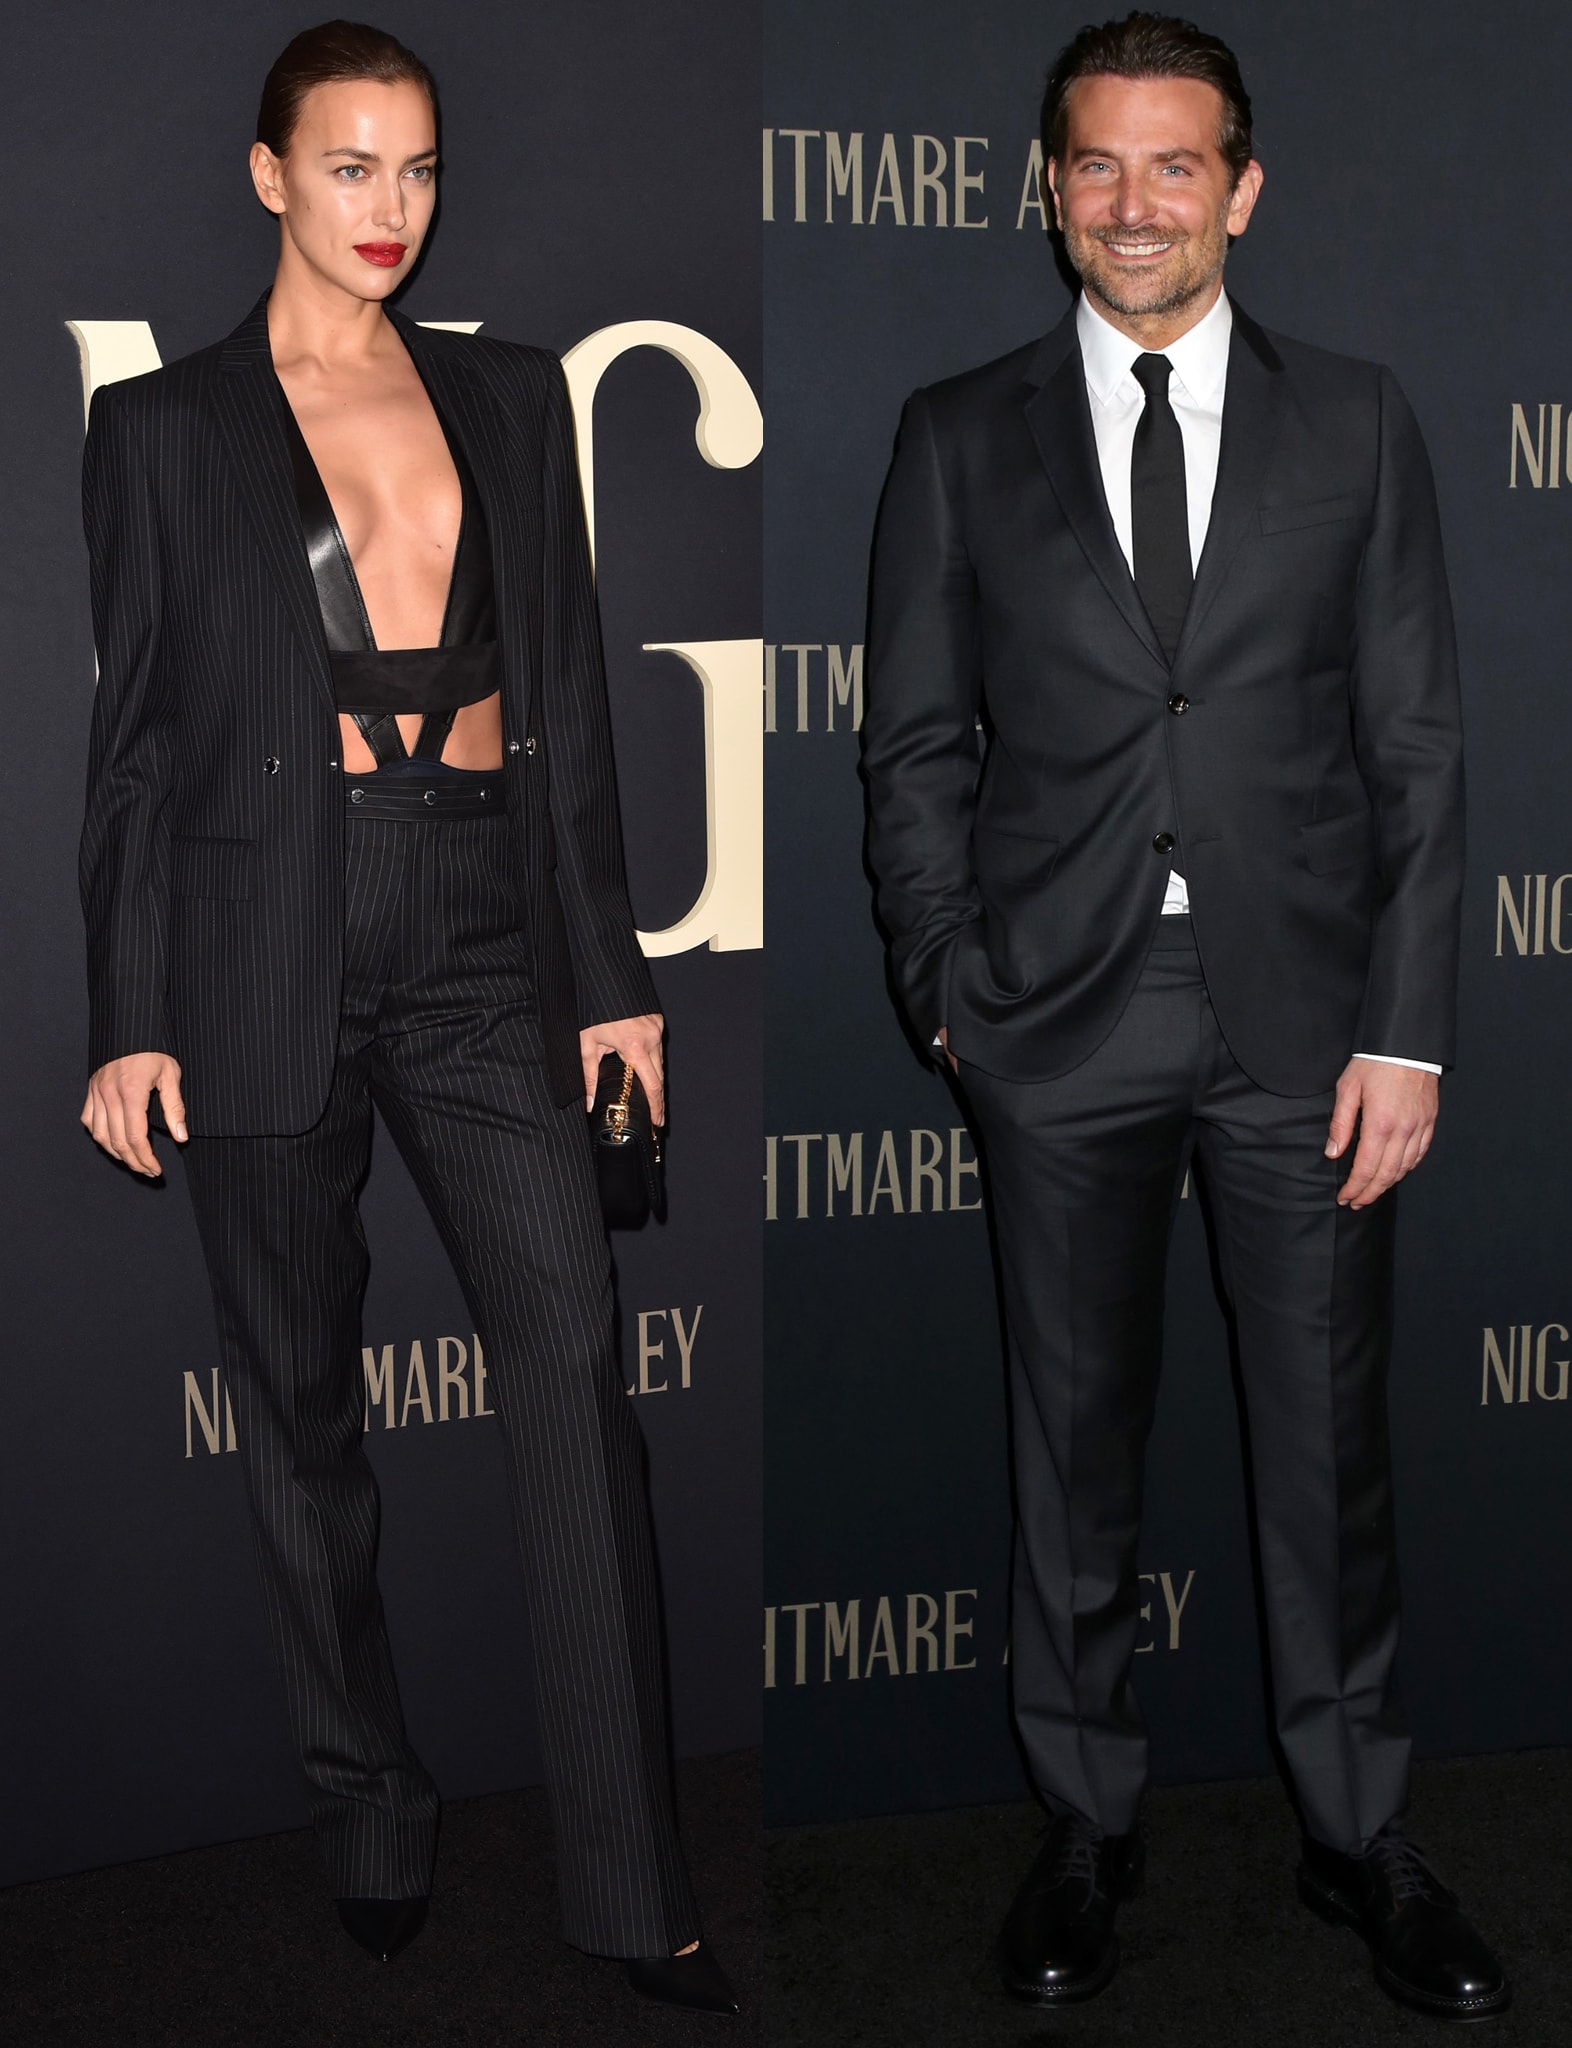 Irina Shayk and Bradley Cooper spark reunion rumors after they were seen walking arm-in-arm in New York City in November 2021